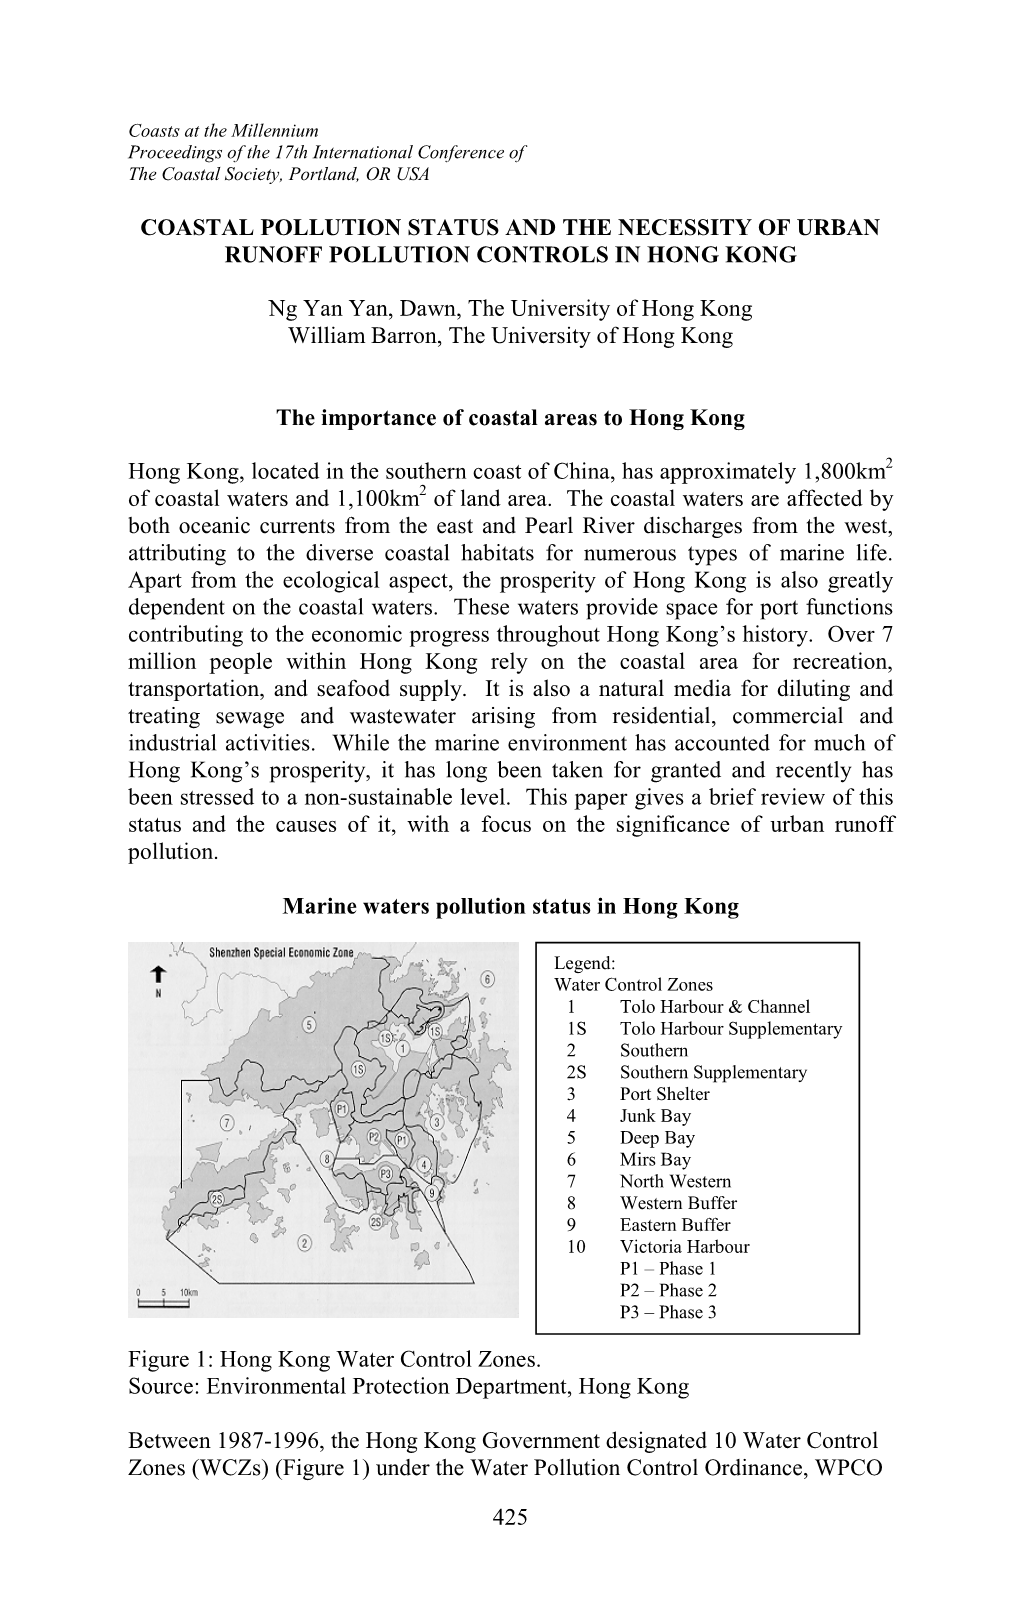 Coastal Pollution Status and the Necessity of Urban Runoff Pollution Controls in Hong Kong